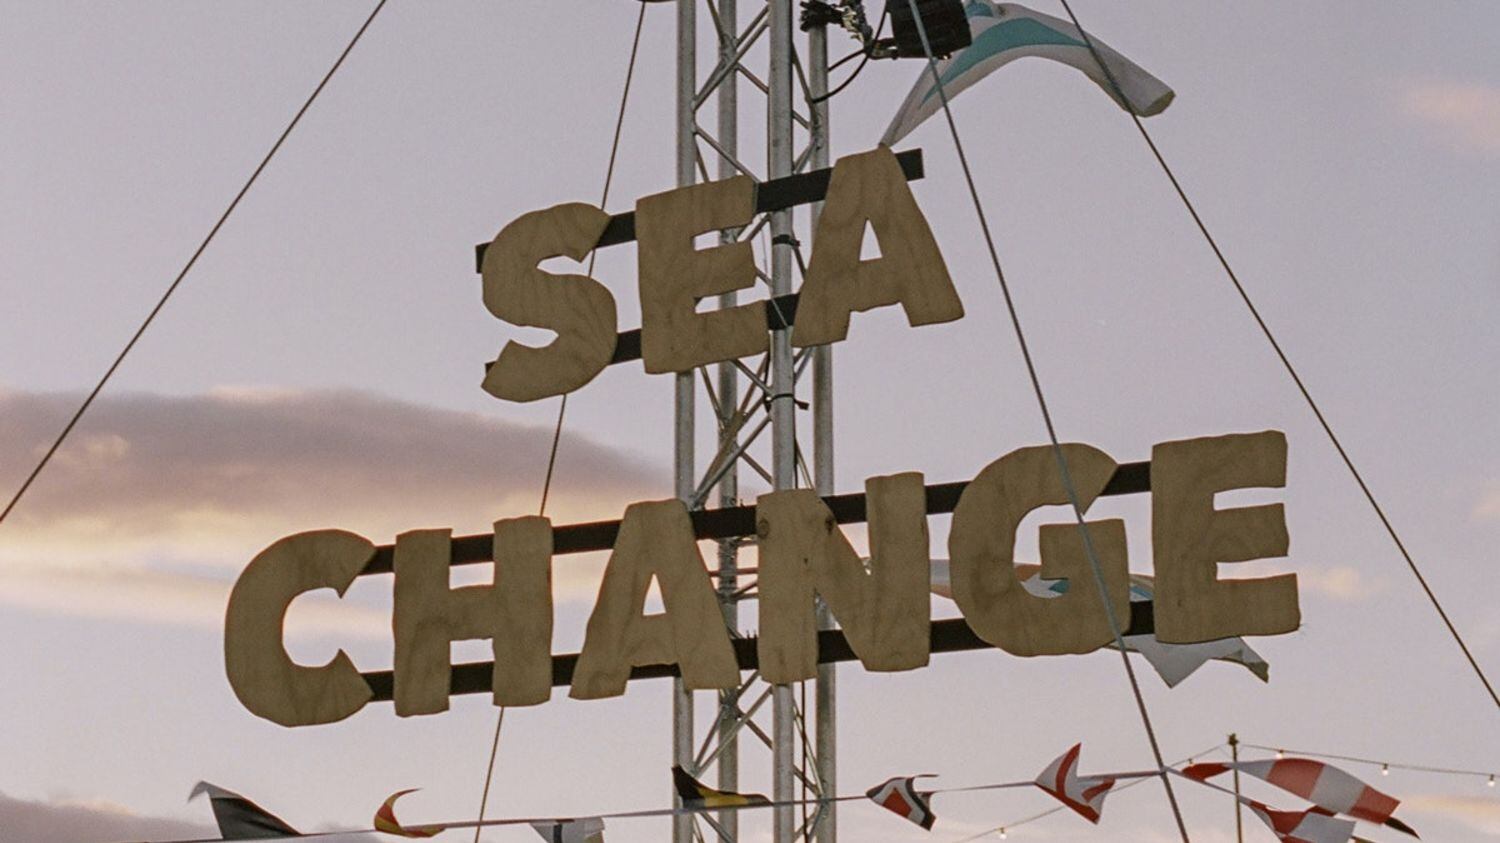 Sea Change, in Devon, applied for around £92,000 from the Culture Recovery Fund.